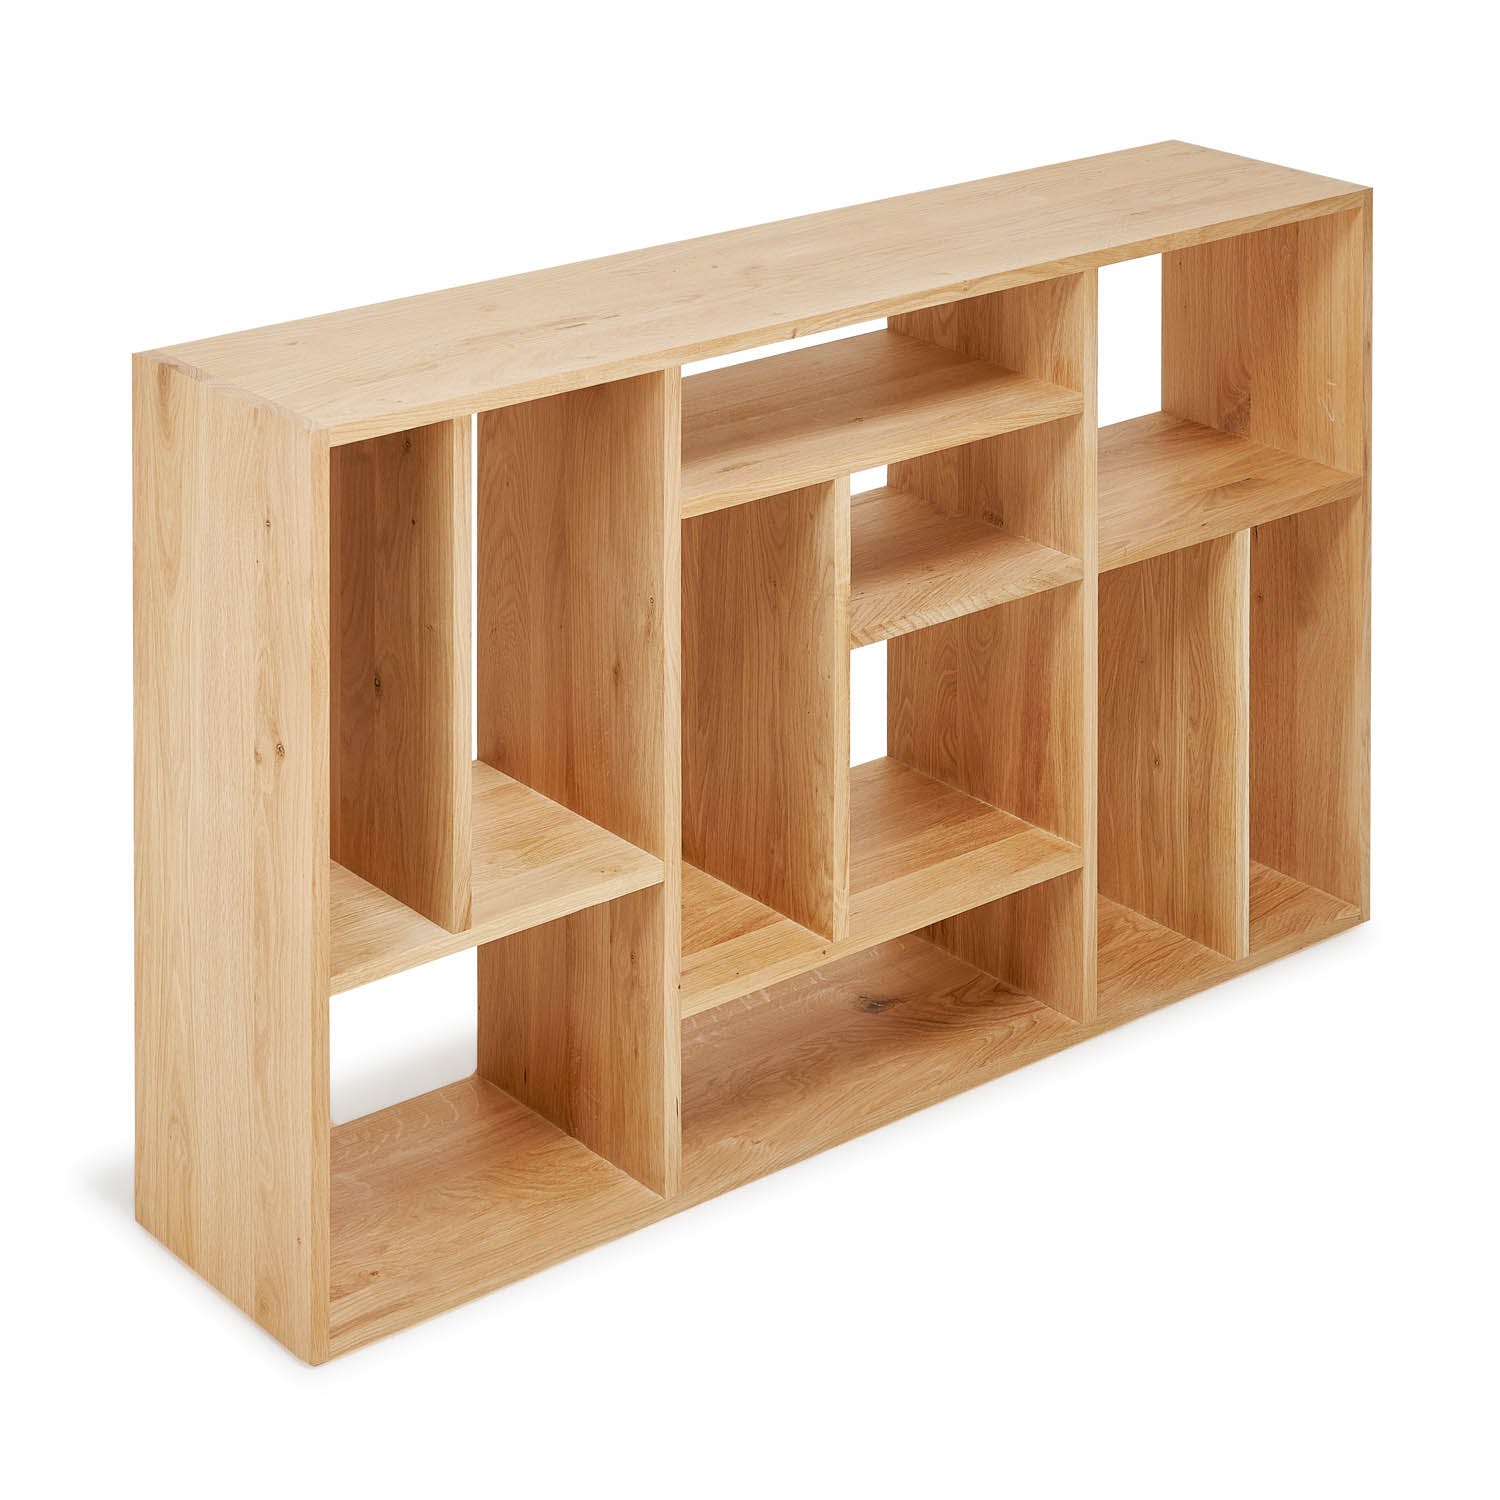 Modern wooden shelving unit with varying compartments on white background.